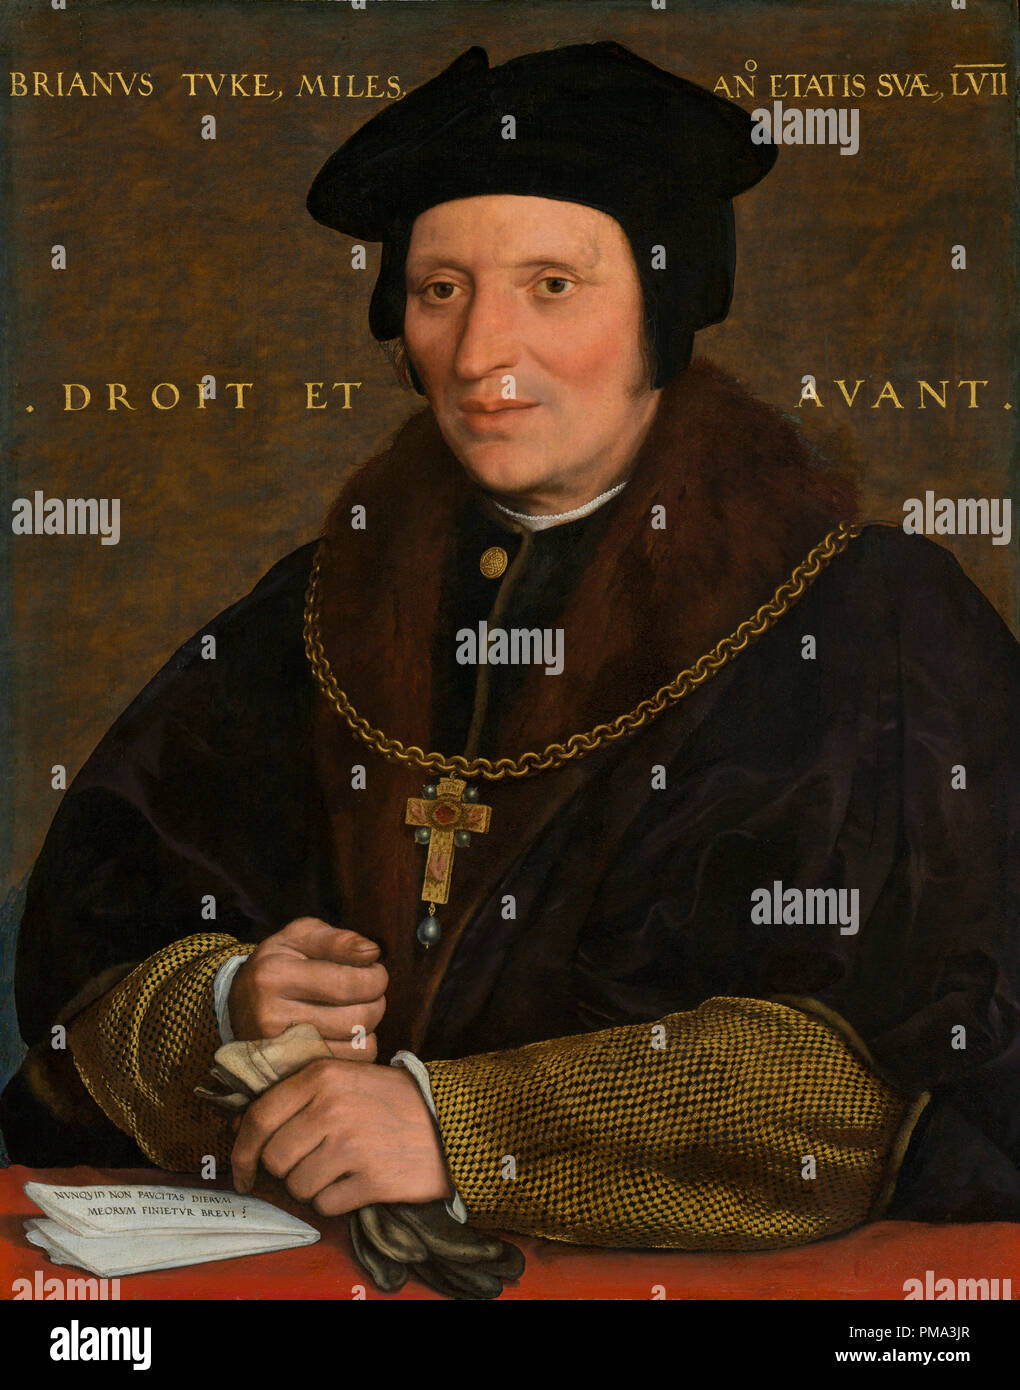 Sir Brian Tuke. Dated: c. 1527/1528 or c. 1532/1534. Dimensions: overall: 49.1 x 38.5 cm (19 5/16 x 15 3/16 in.)  framed: 67 x 57.5 x 7.6 cm (26 3/8 x 22 5/8 x 3 in.). Medium: oil on panel. Museum: National Gallery of Art, Washington DC. Author: Hans Holbein the Younger. Stock Photo